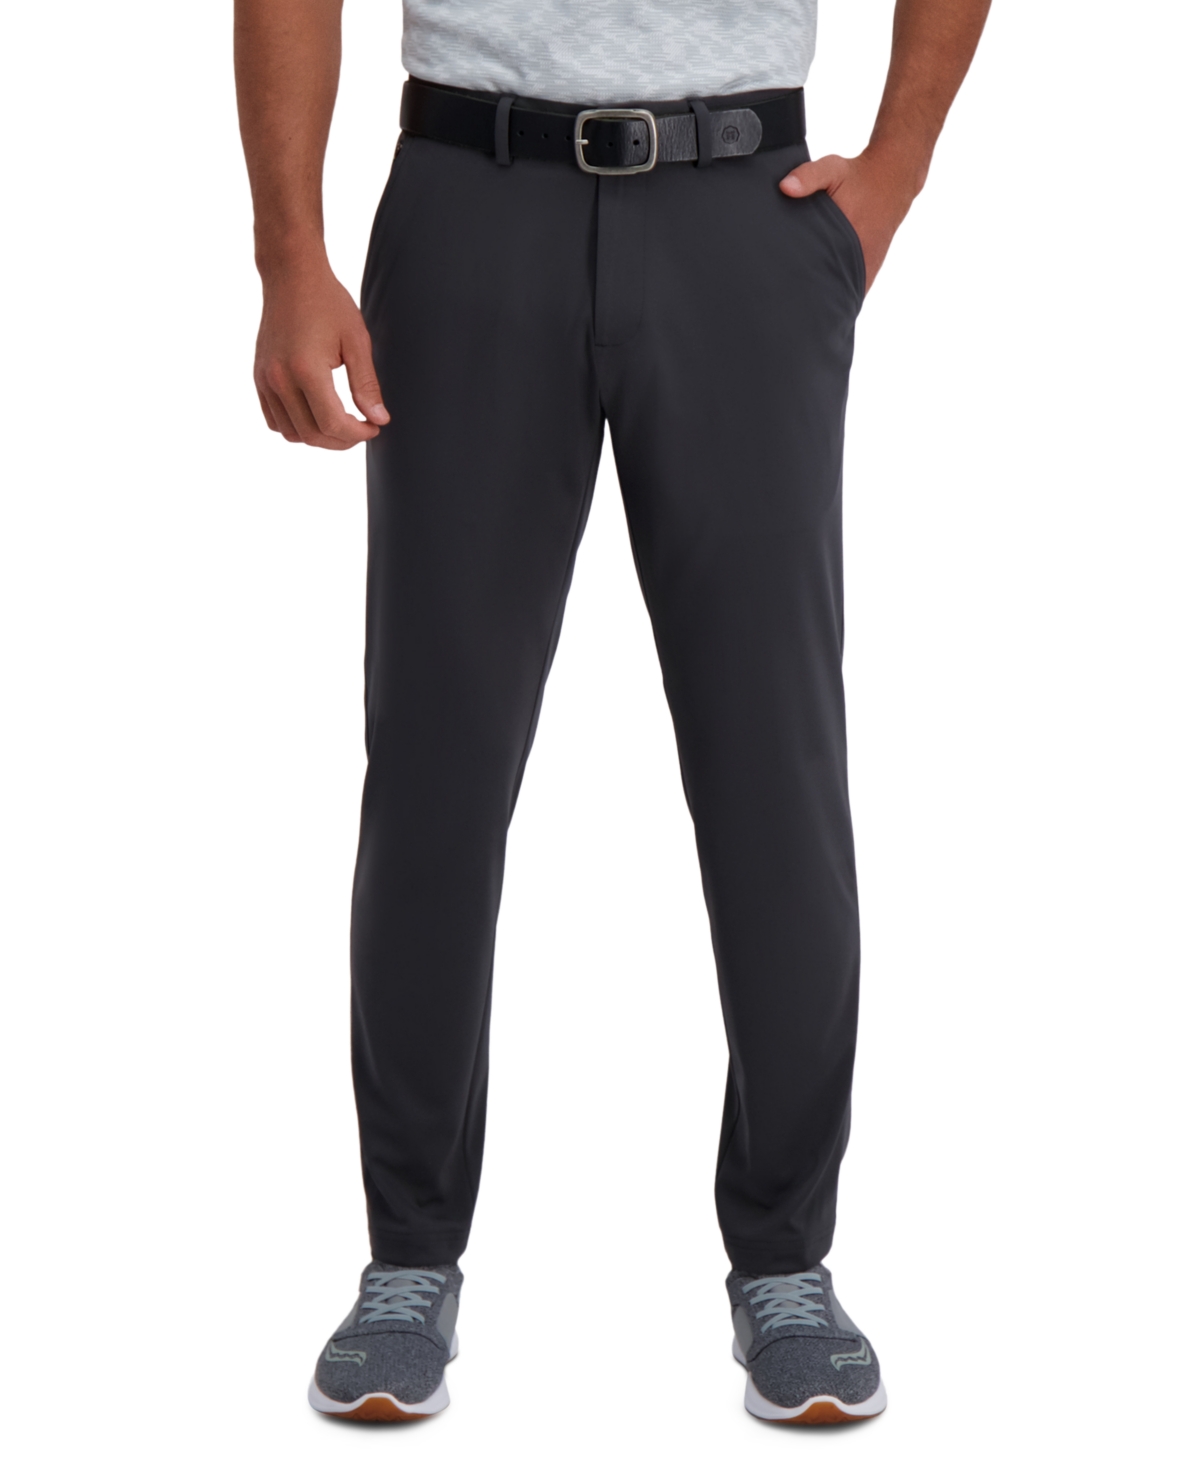 Men's Active Series Slim-Fit Stretch Solid Casual Pants - Charcoal